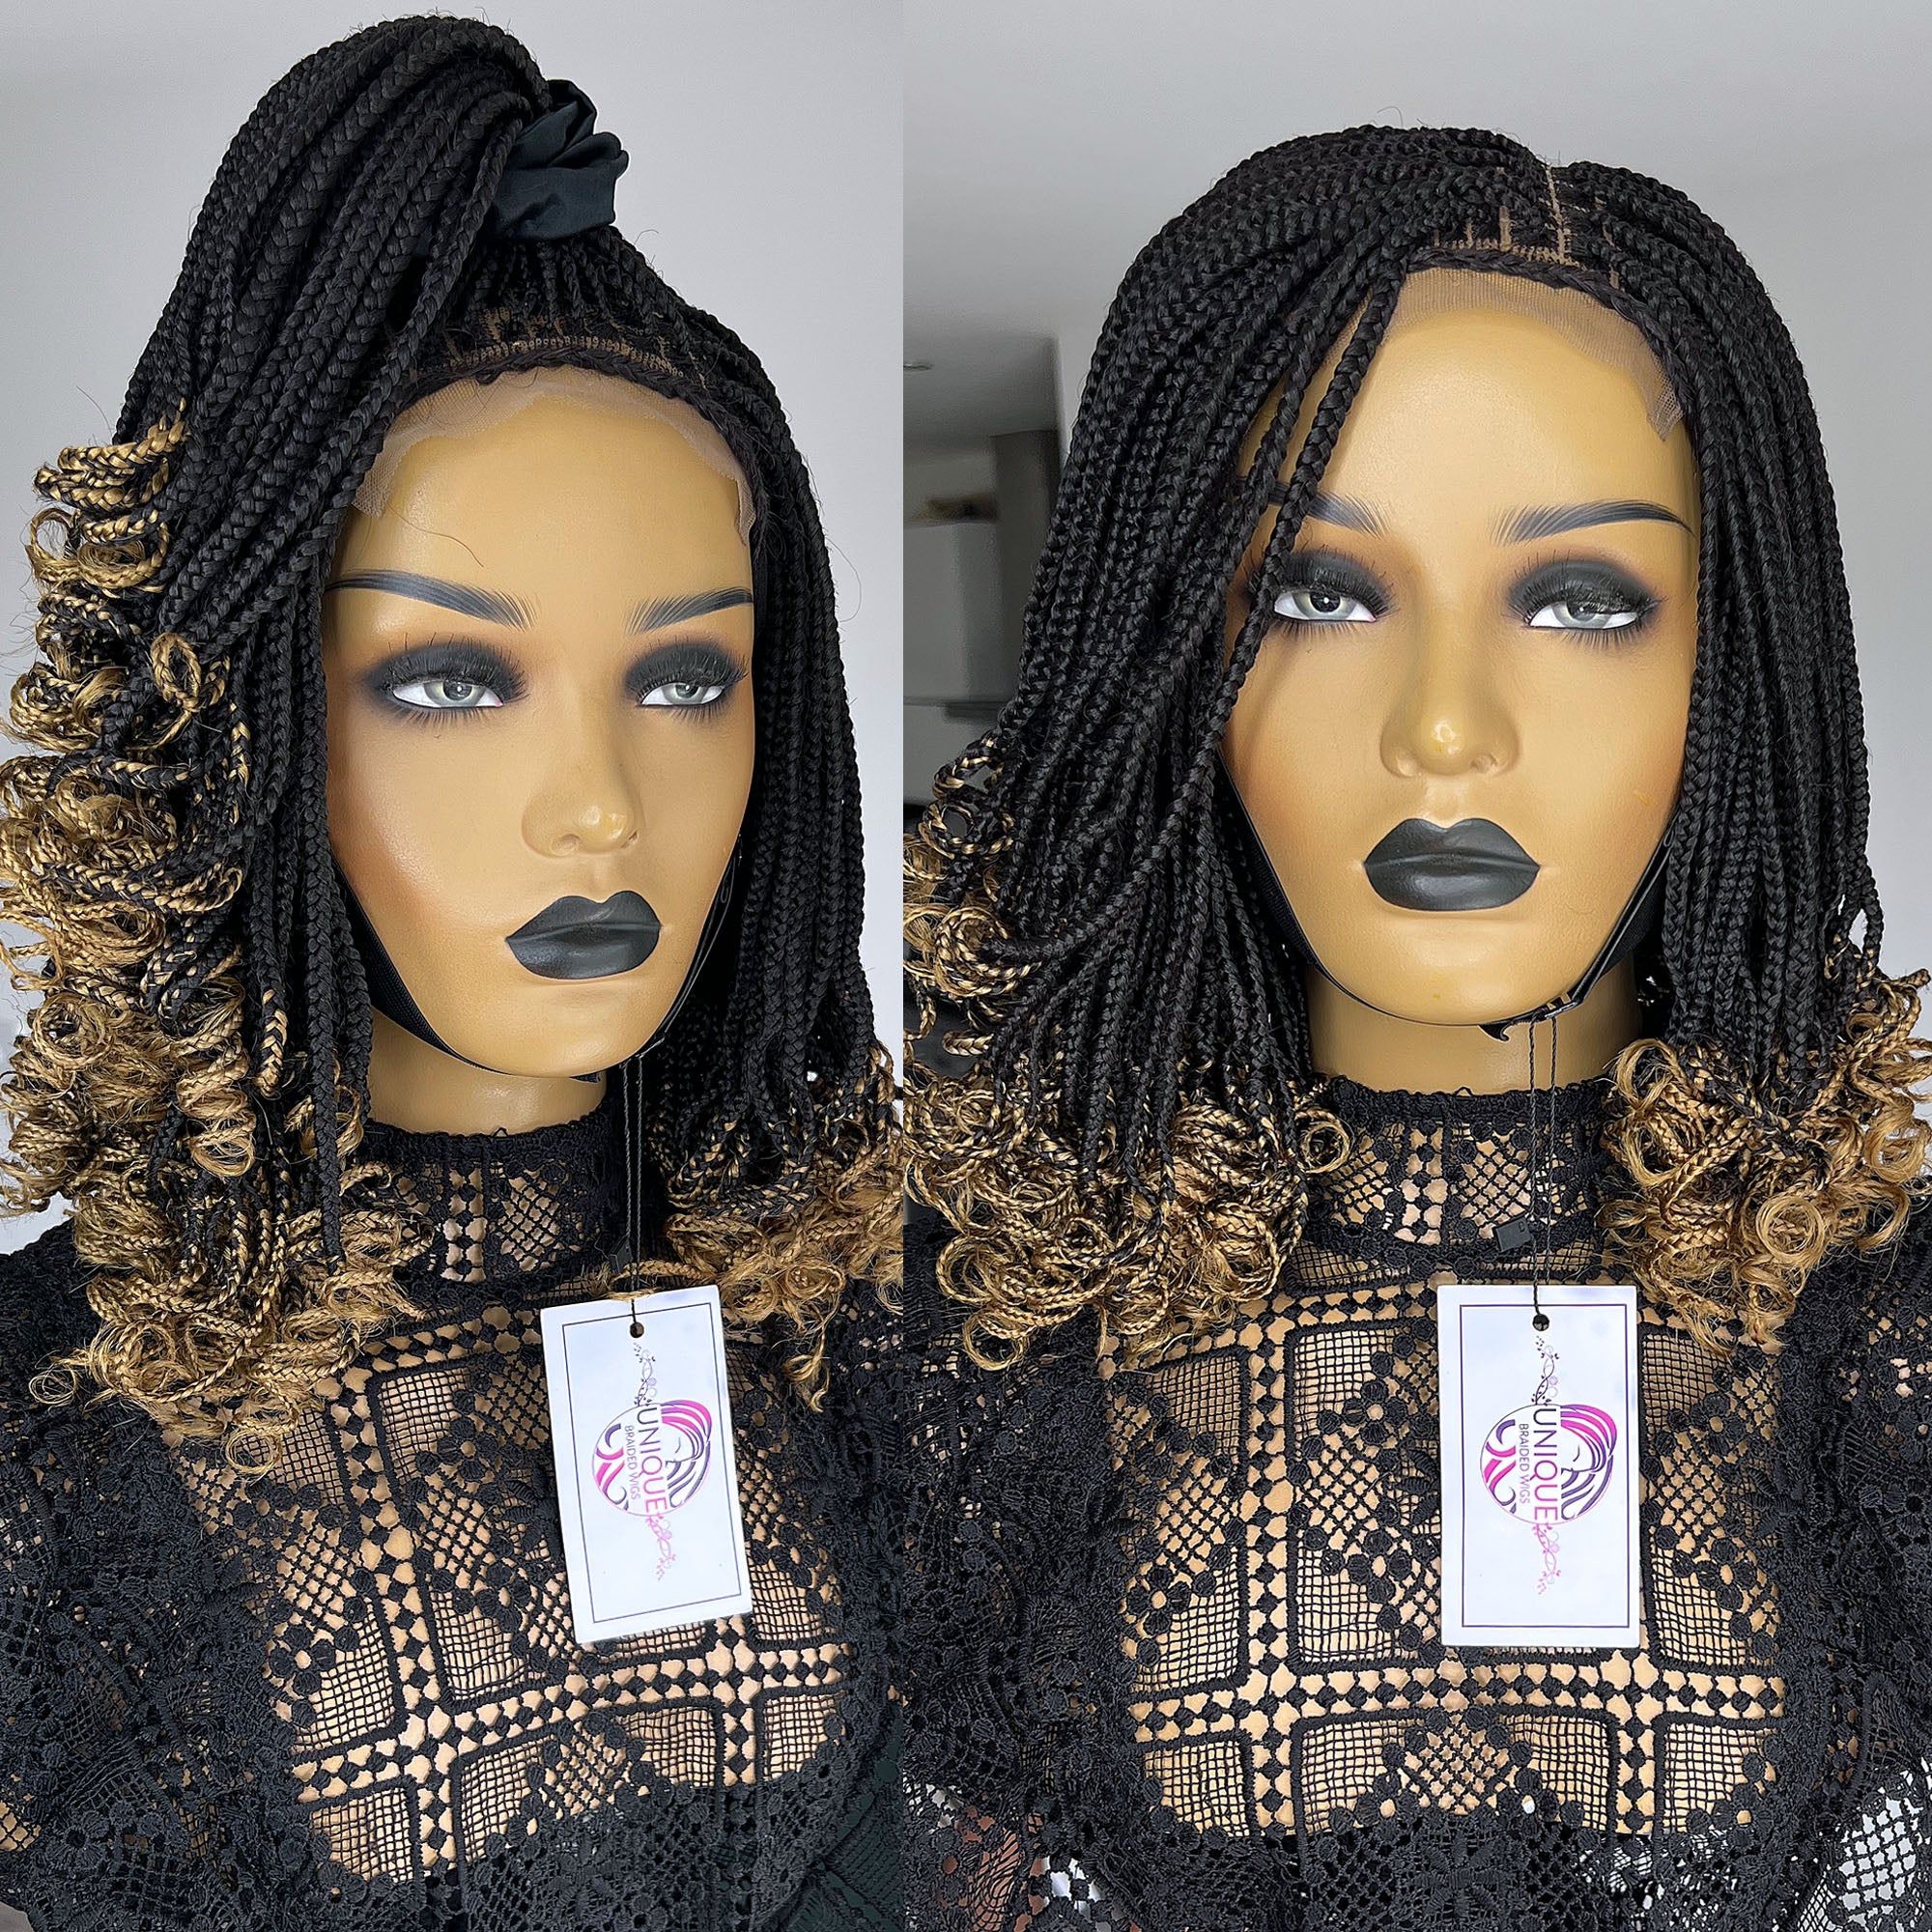 27 Stunning Knotless Braids You Can't Ignore This Year